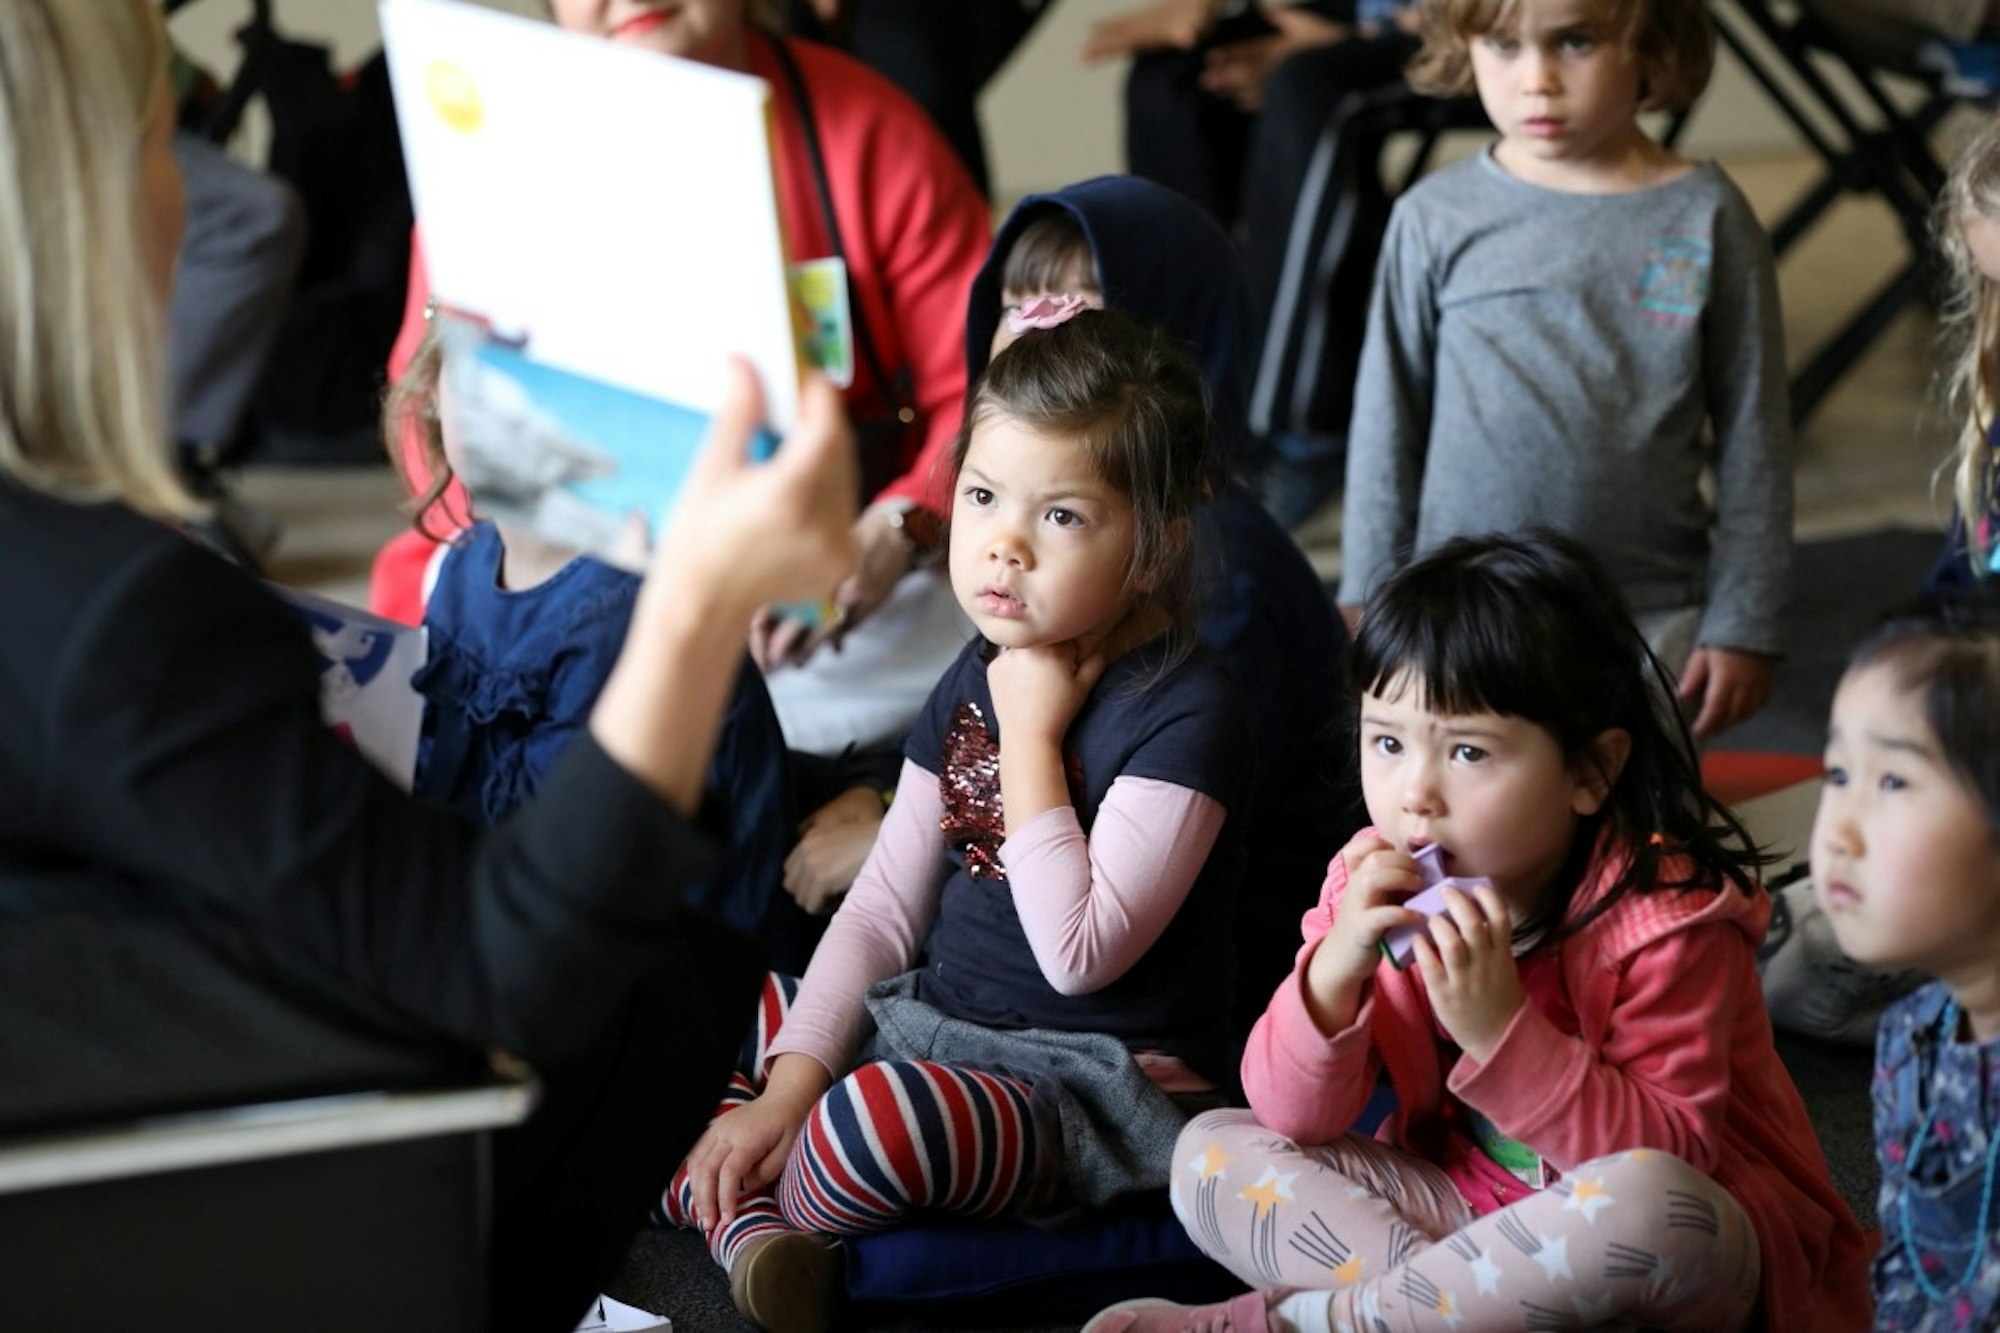 Children sit on the floor looking up at a person who is holding a book